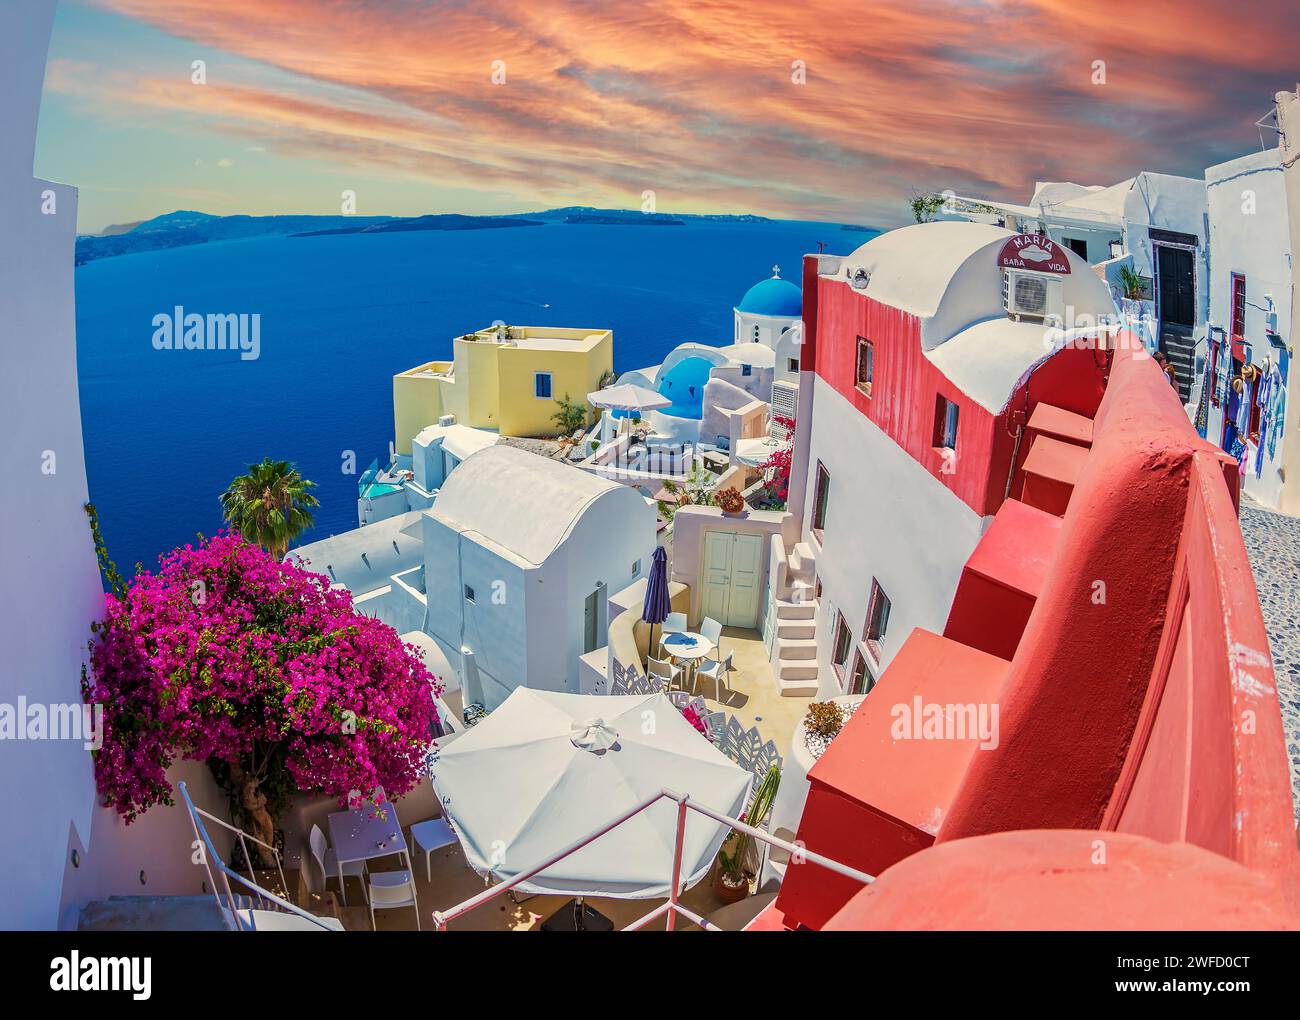 Oia, Santorini island, Greece - June 21, 2021: Typical traditional architecture with houses, domes and churches in afternoon light. Stock Photo